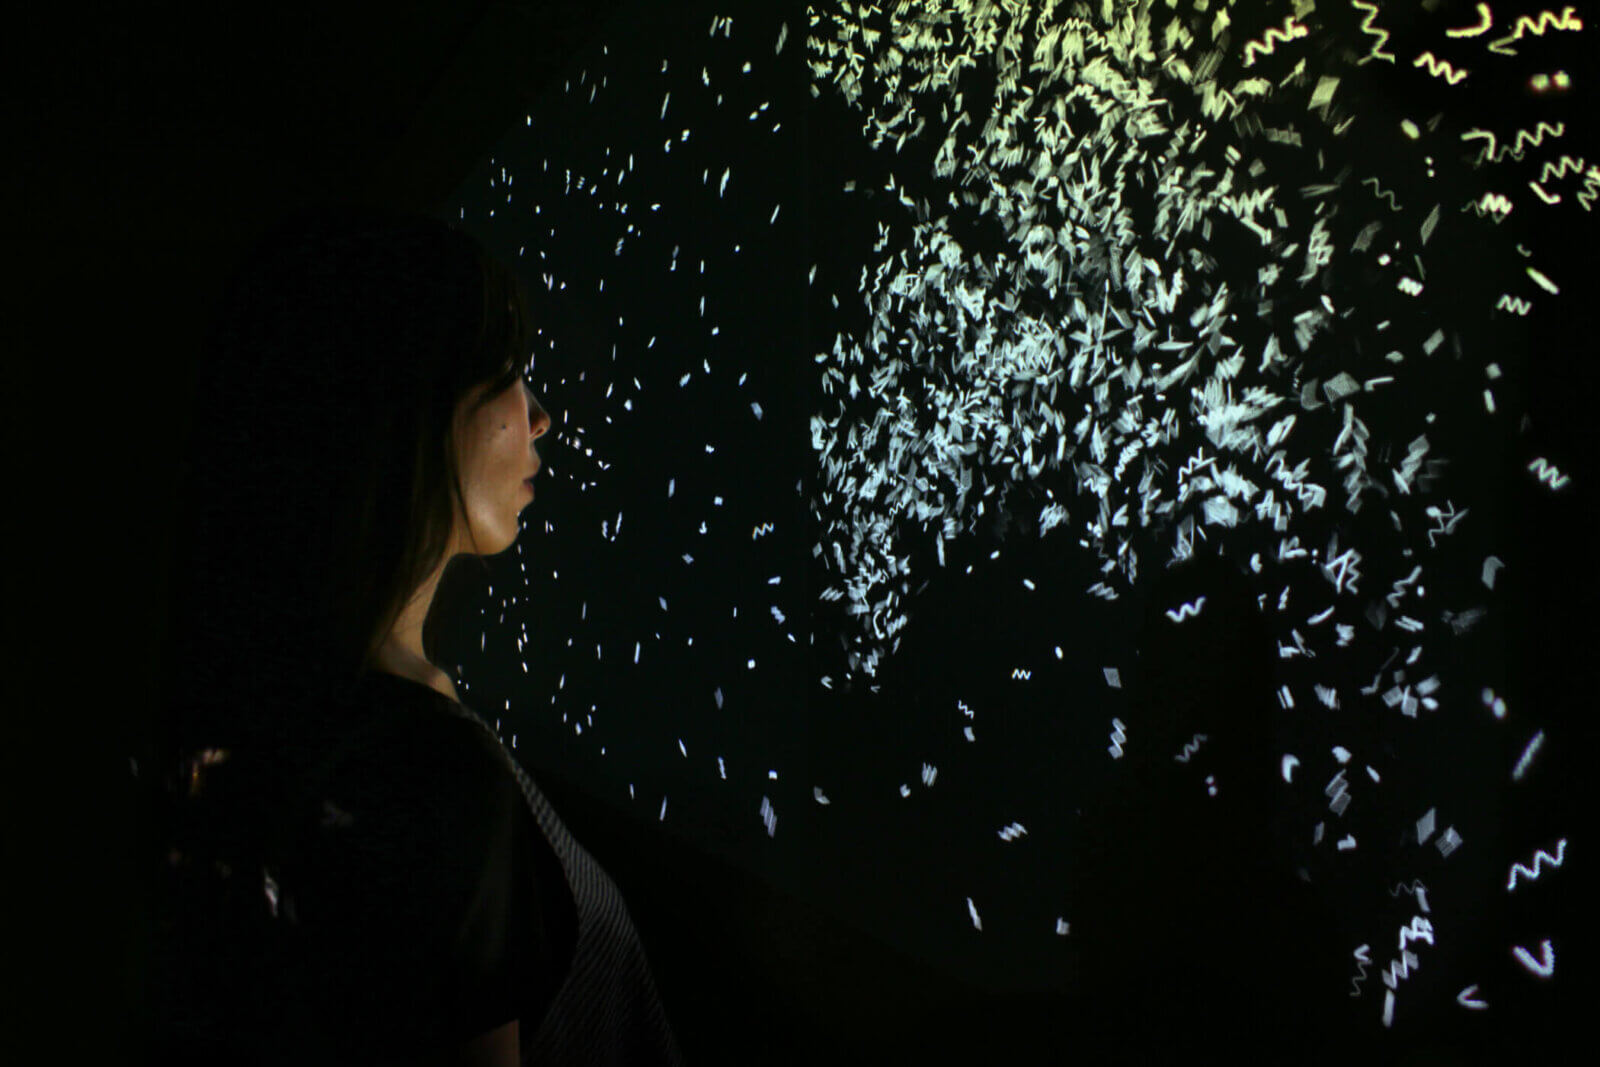 Plumial Space detail from London College of Fashion, Arcade East Gallery, 2018. Image showing the interaction with the particle animation produced for Plumial Space 